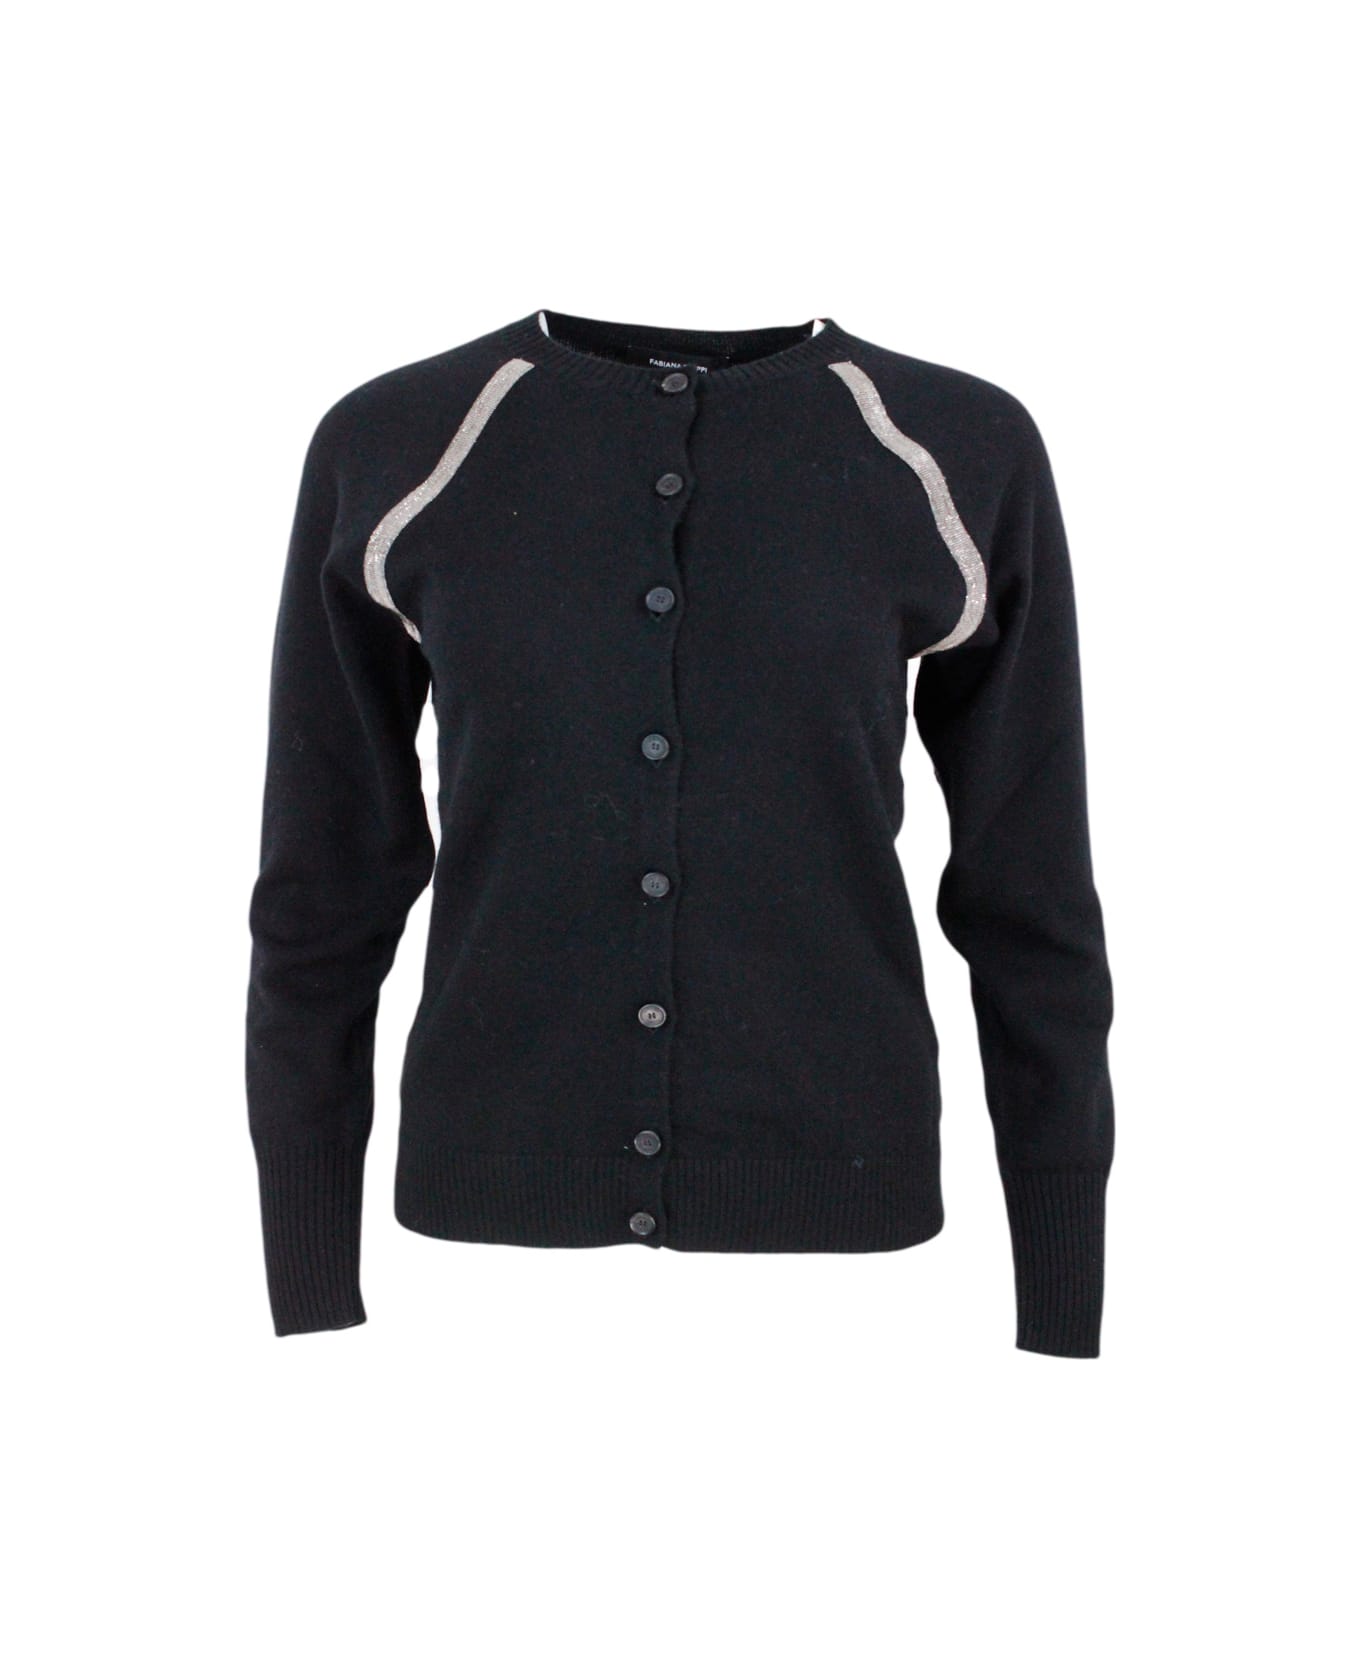 Fabiana Filippi Cardigan Sweater With Crew Neck And Button Closure In 100% Cashmere Embellished With Brilliant Monili On The Armhole - Black